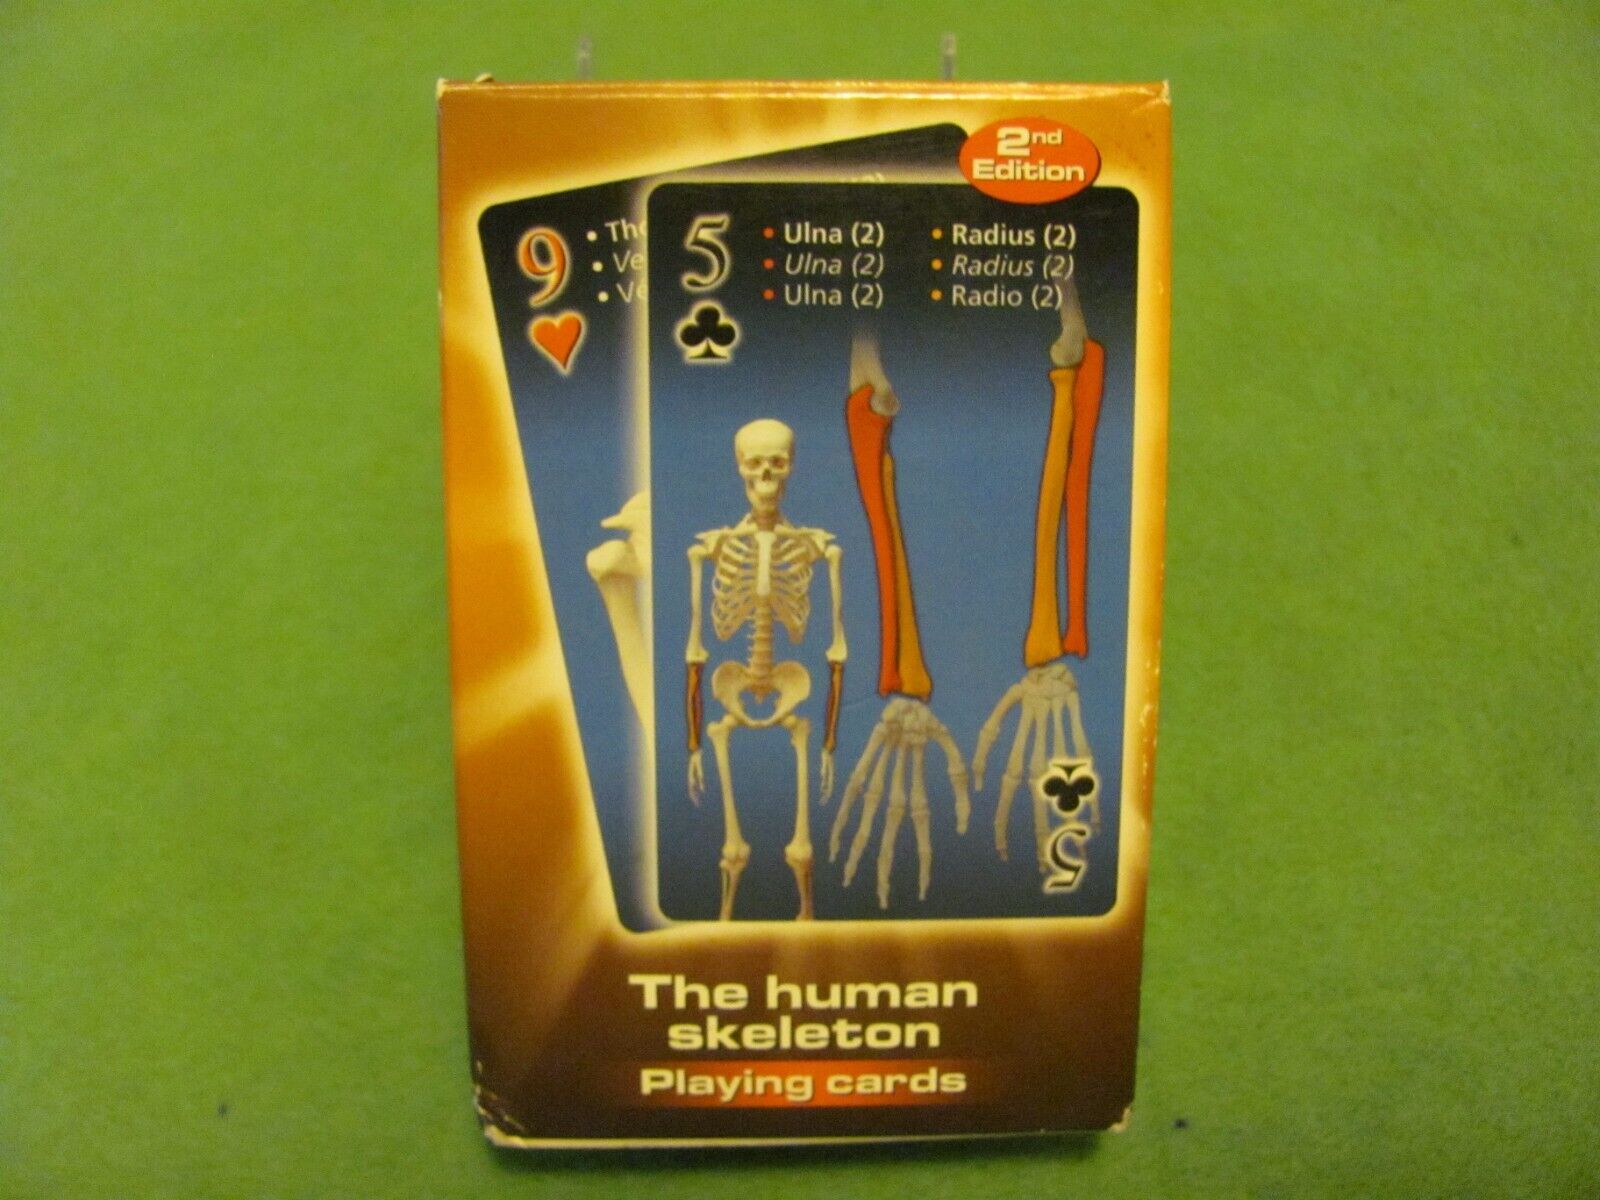 Human skeleton playing cards 2nd. Edition 2007. Printed in CANADA.